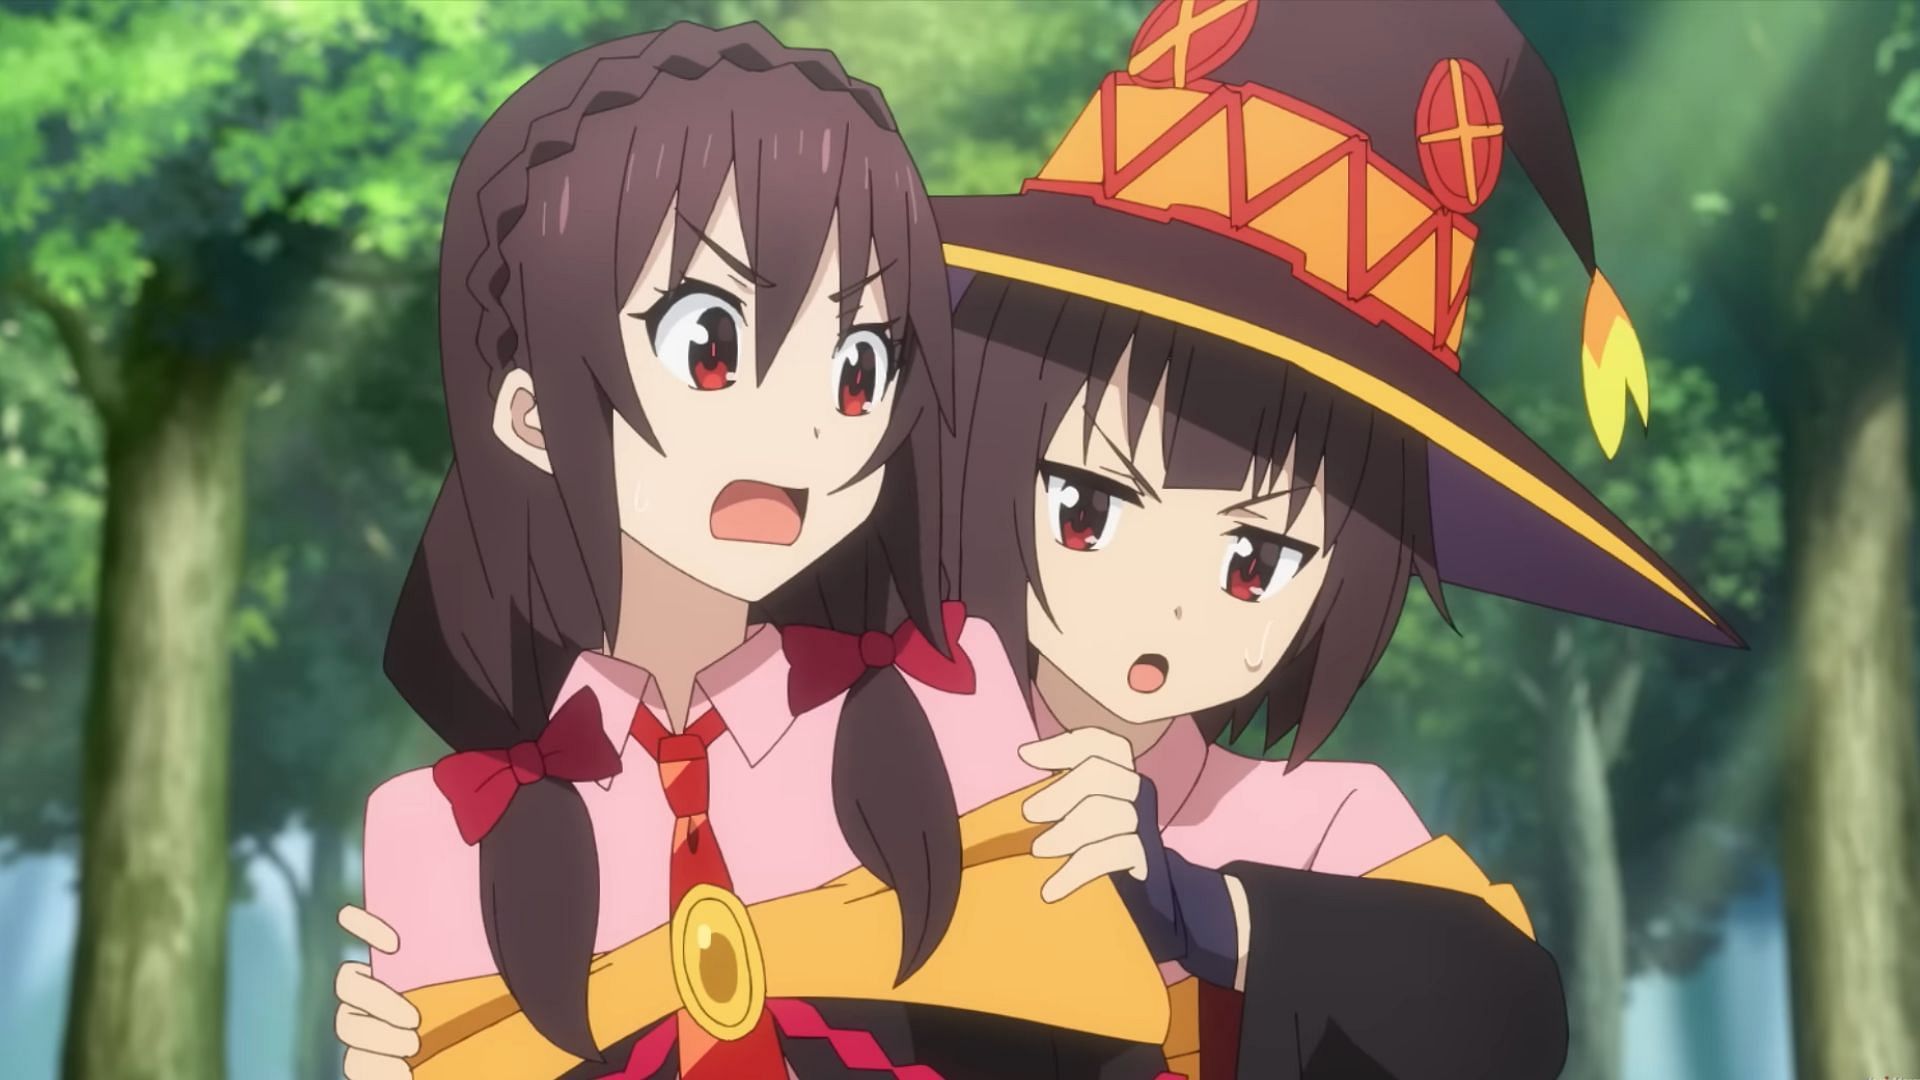 Konosuba An Explosion On This Wonderful World Episode 3 Megumin And Yunyun Attempt To Help